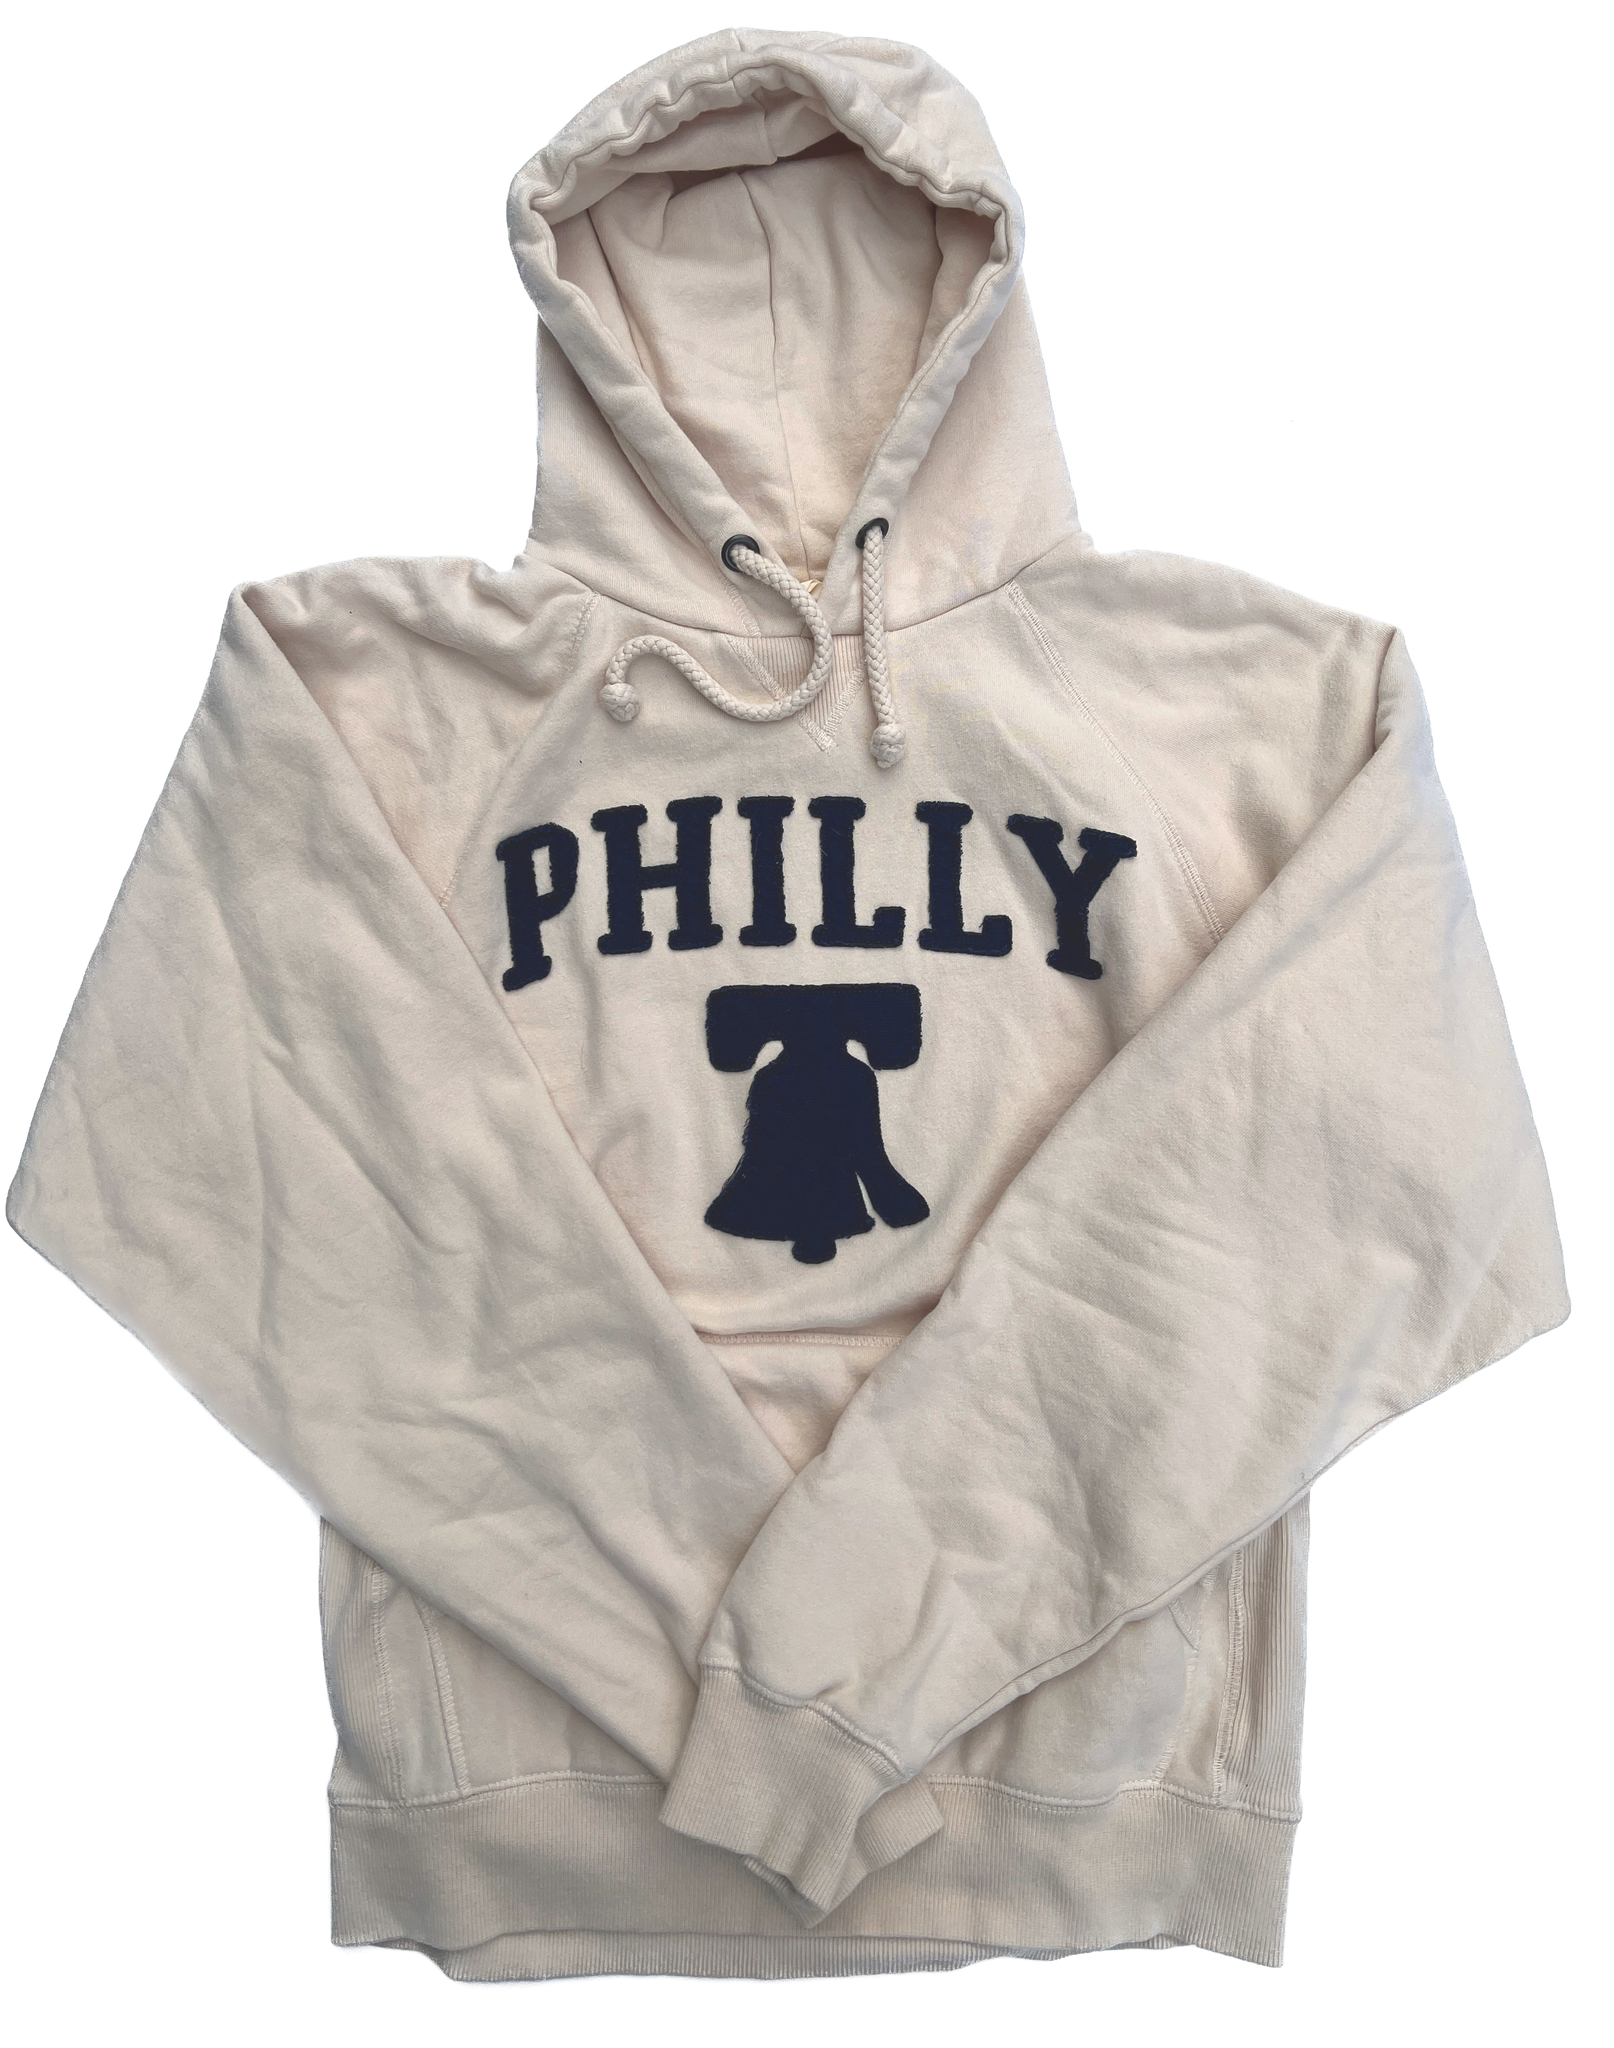 Philly Liberty Bell Hoodie - White/Navy Blue